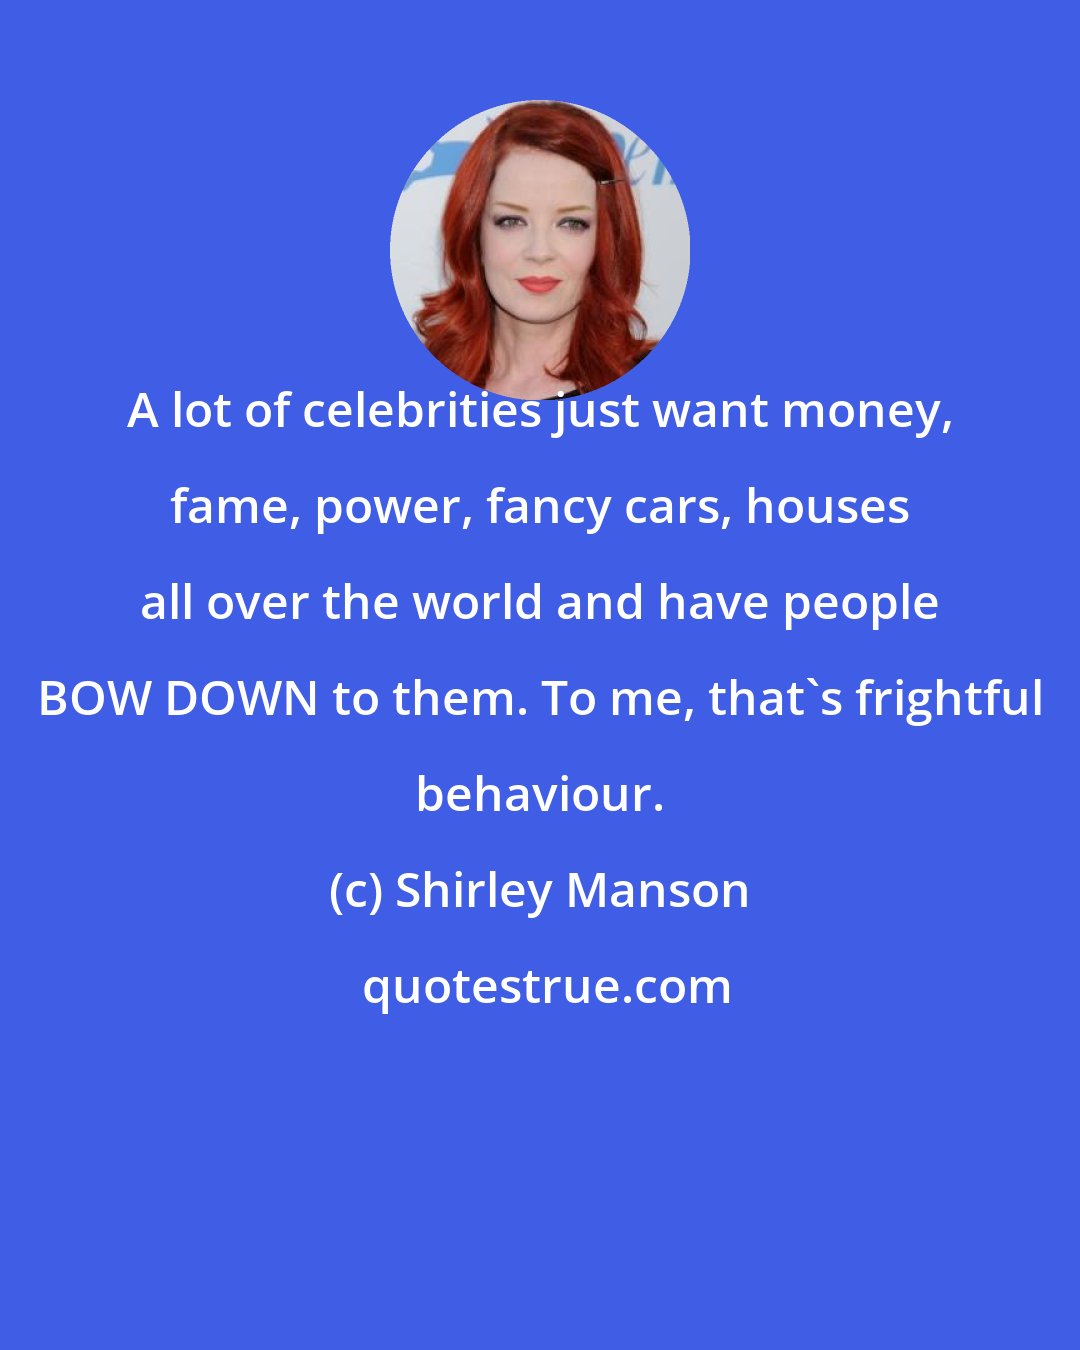 Shirley Manson: A lot of celebrities just want money, fame, power, fancy cars, houses all over the world and have people BOW DOWN to them. To me, that's frightful behaviour.